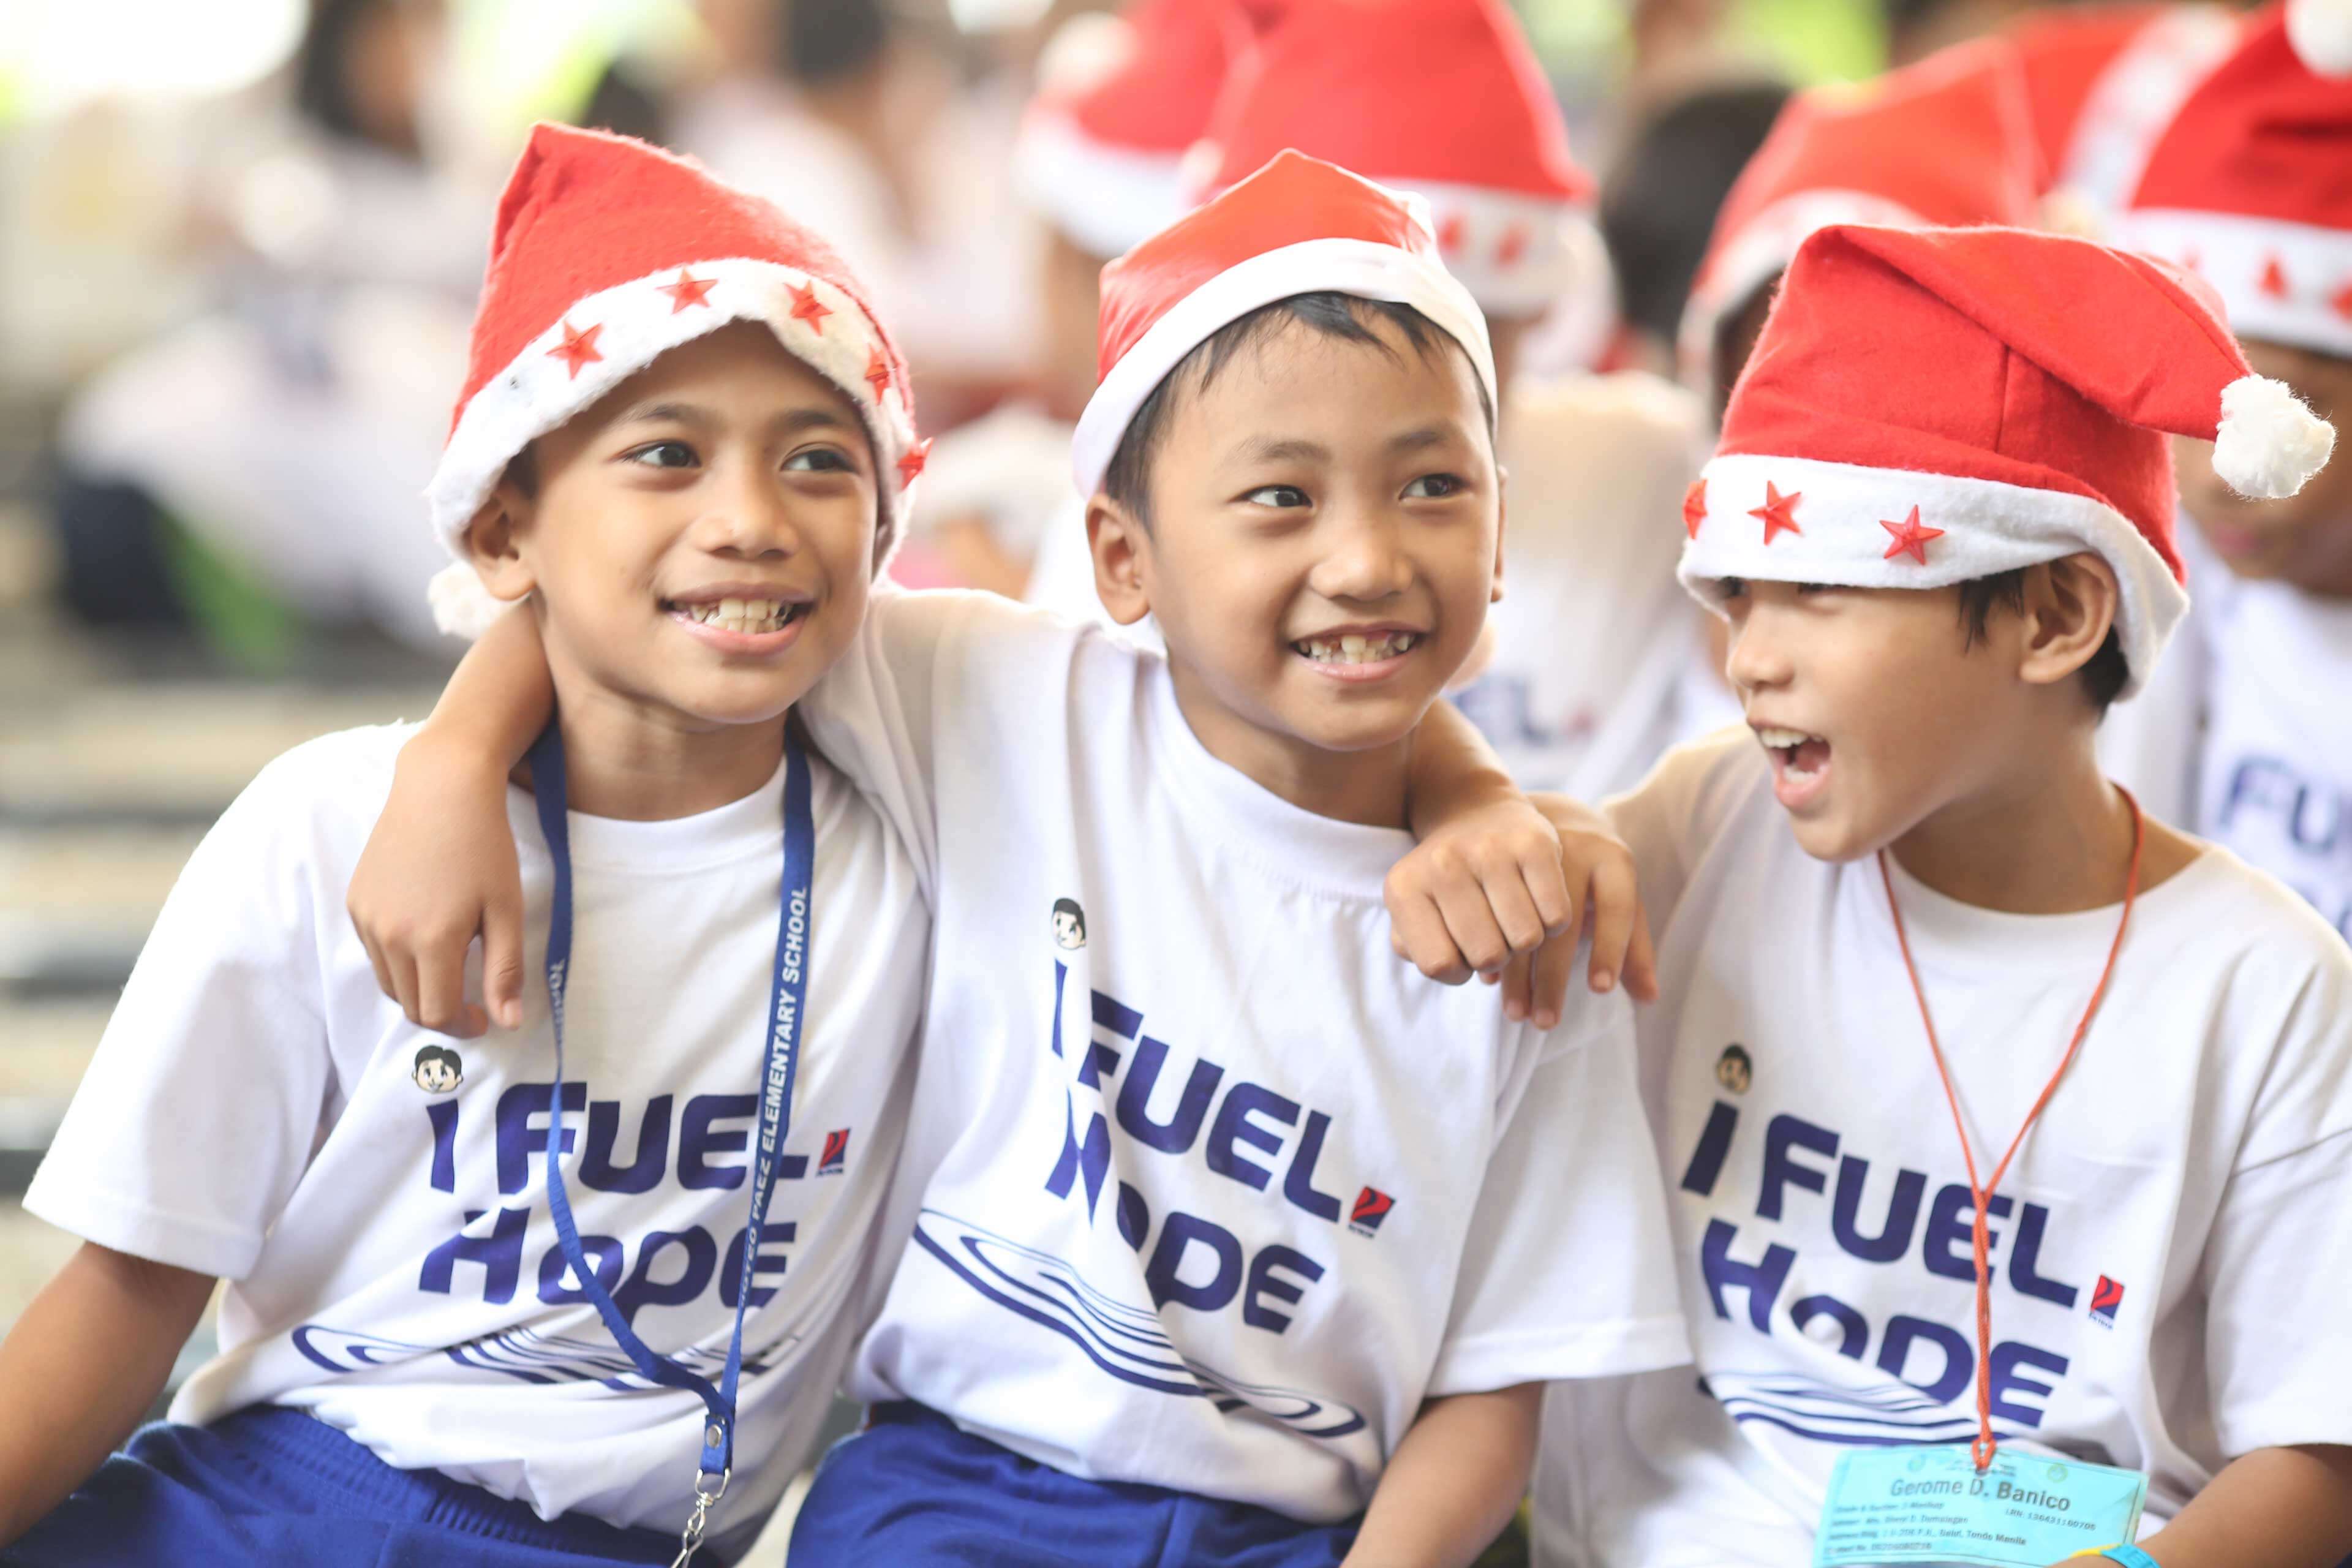 Petron brings holiday cheer to 3,000 scholars all over the country